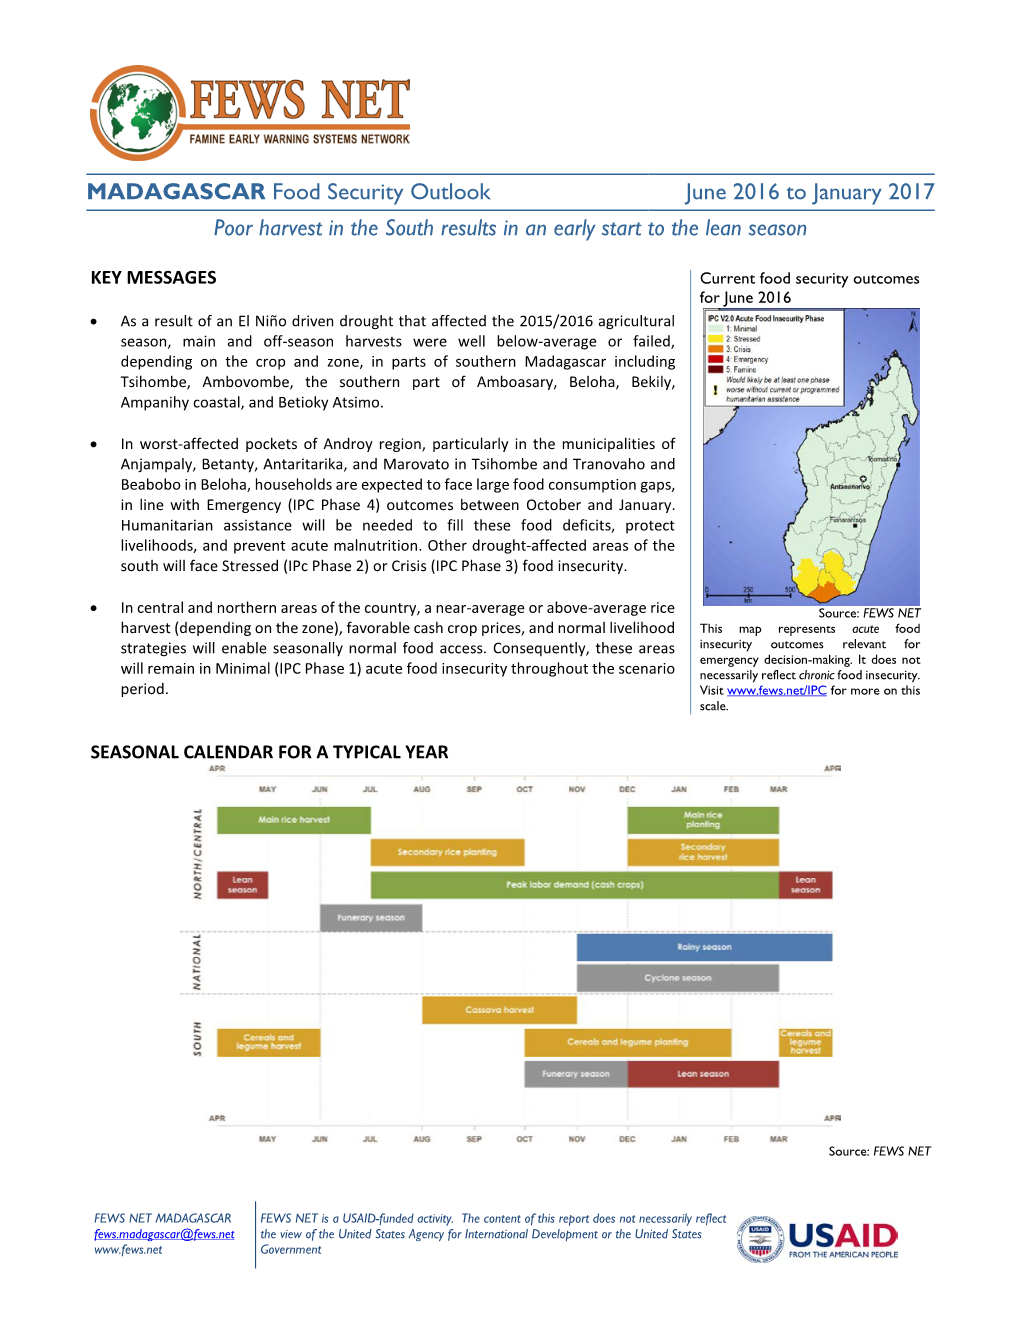 MADAGASCAR Food Security Outlook June 2016 to January 2017 Poor Harvest in the South Results in an Early Start to the Lean Seas